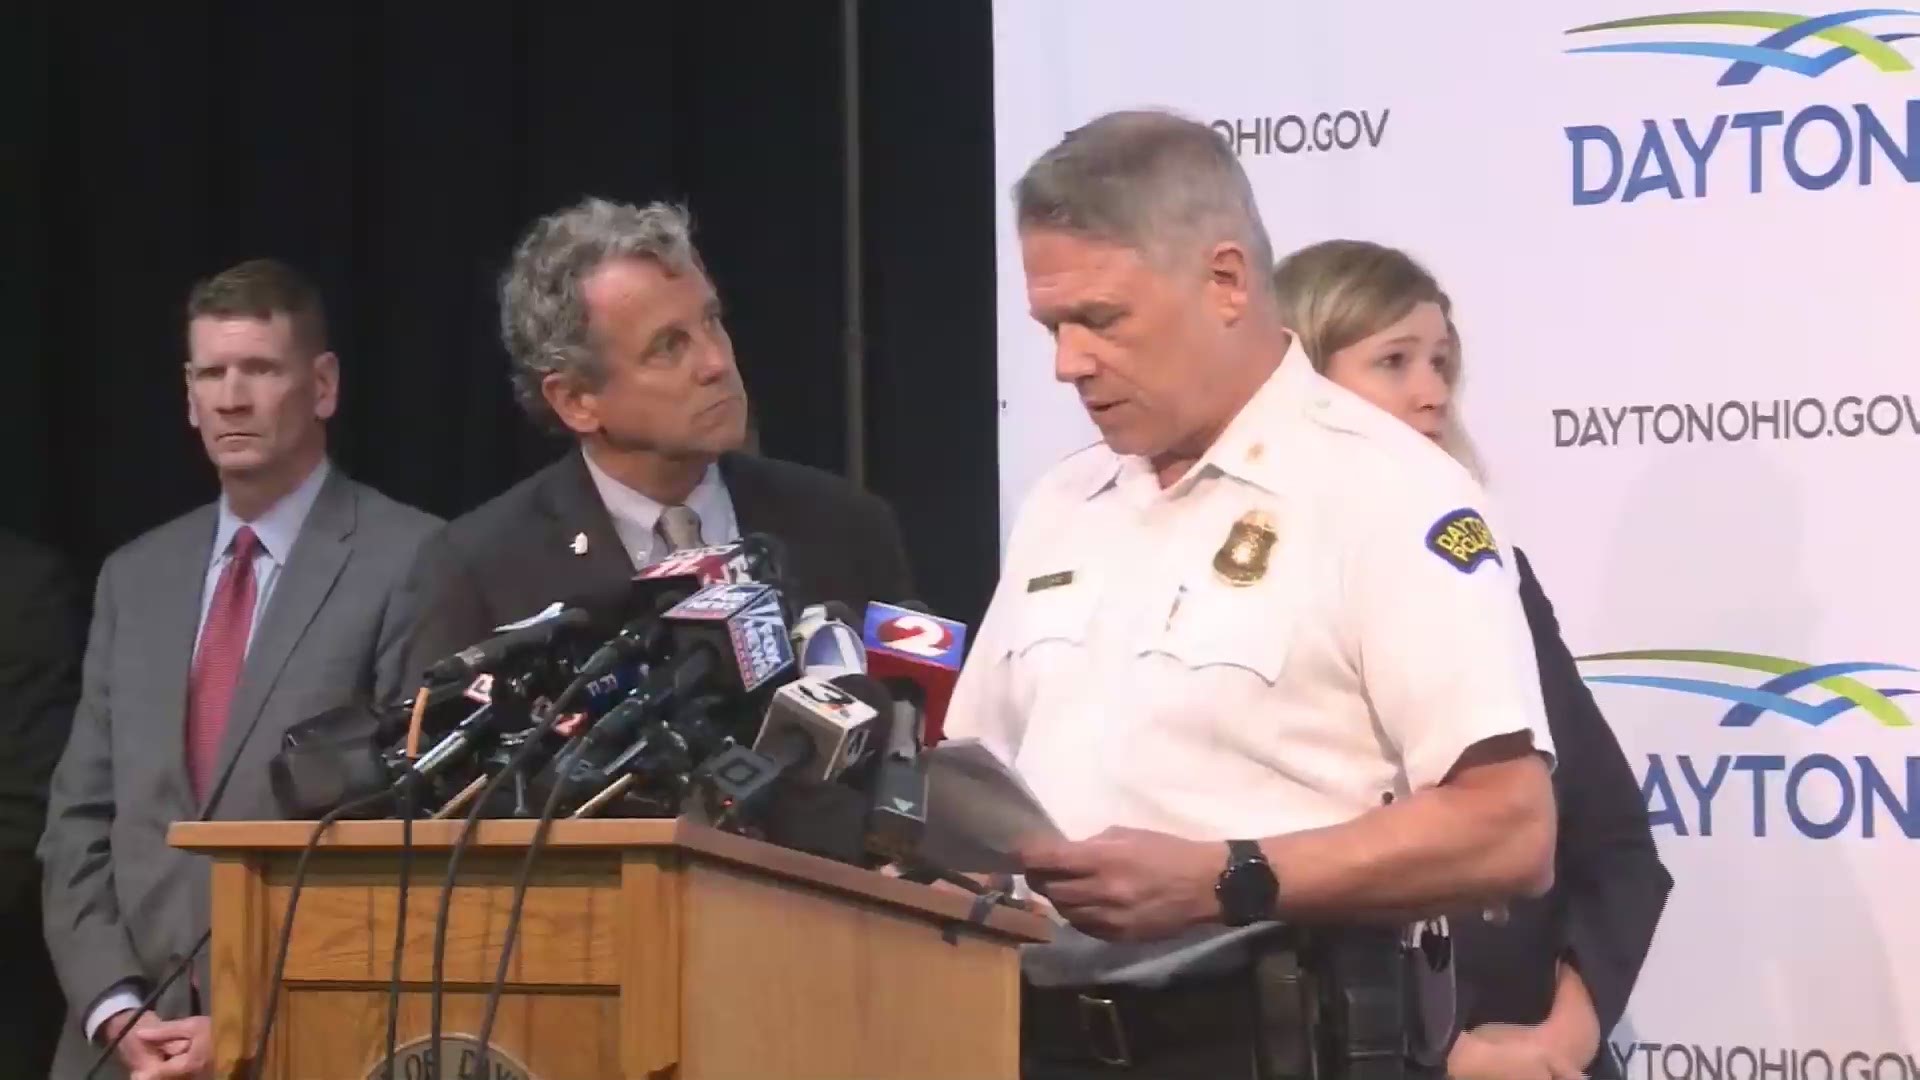 Officials in Dayton held their final press conference Saturday at 4 p.m. The police chief gave a timeline of events and took questions from reporters.